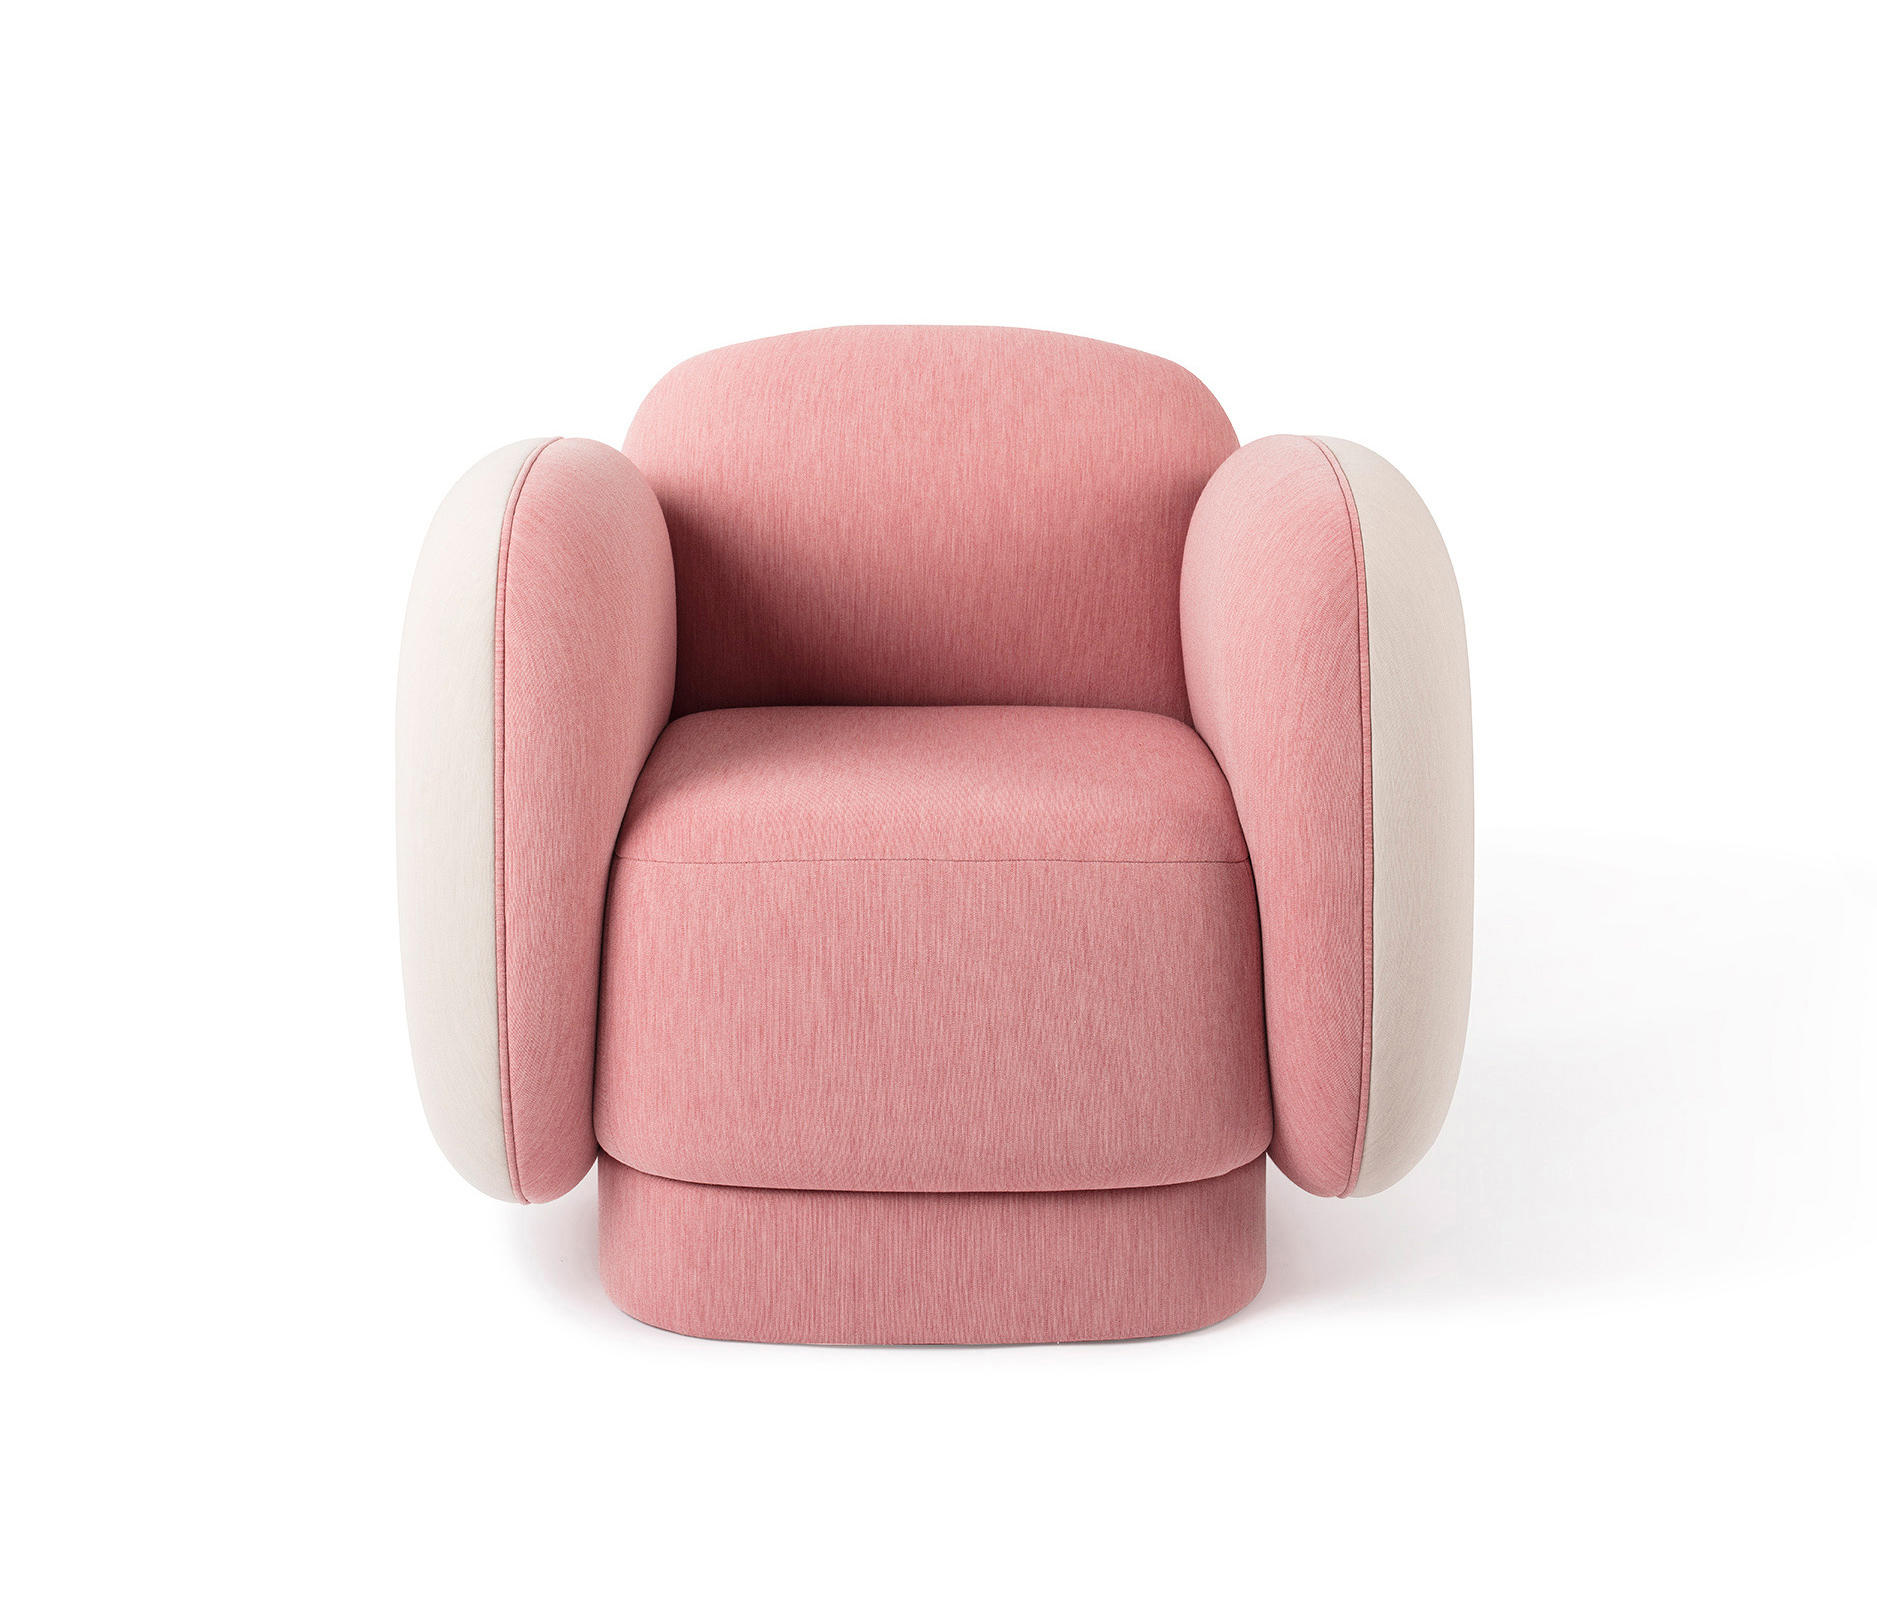 Major Tom Seating Collection by Thomas Dariel for Maison Dada